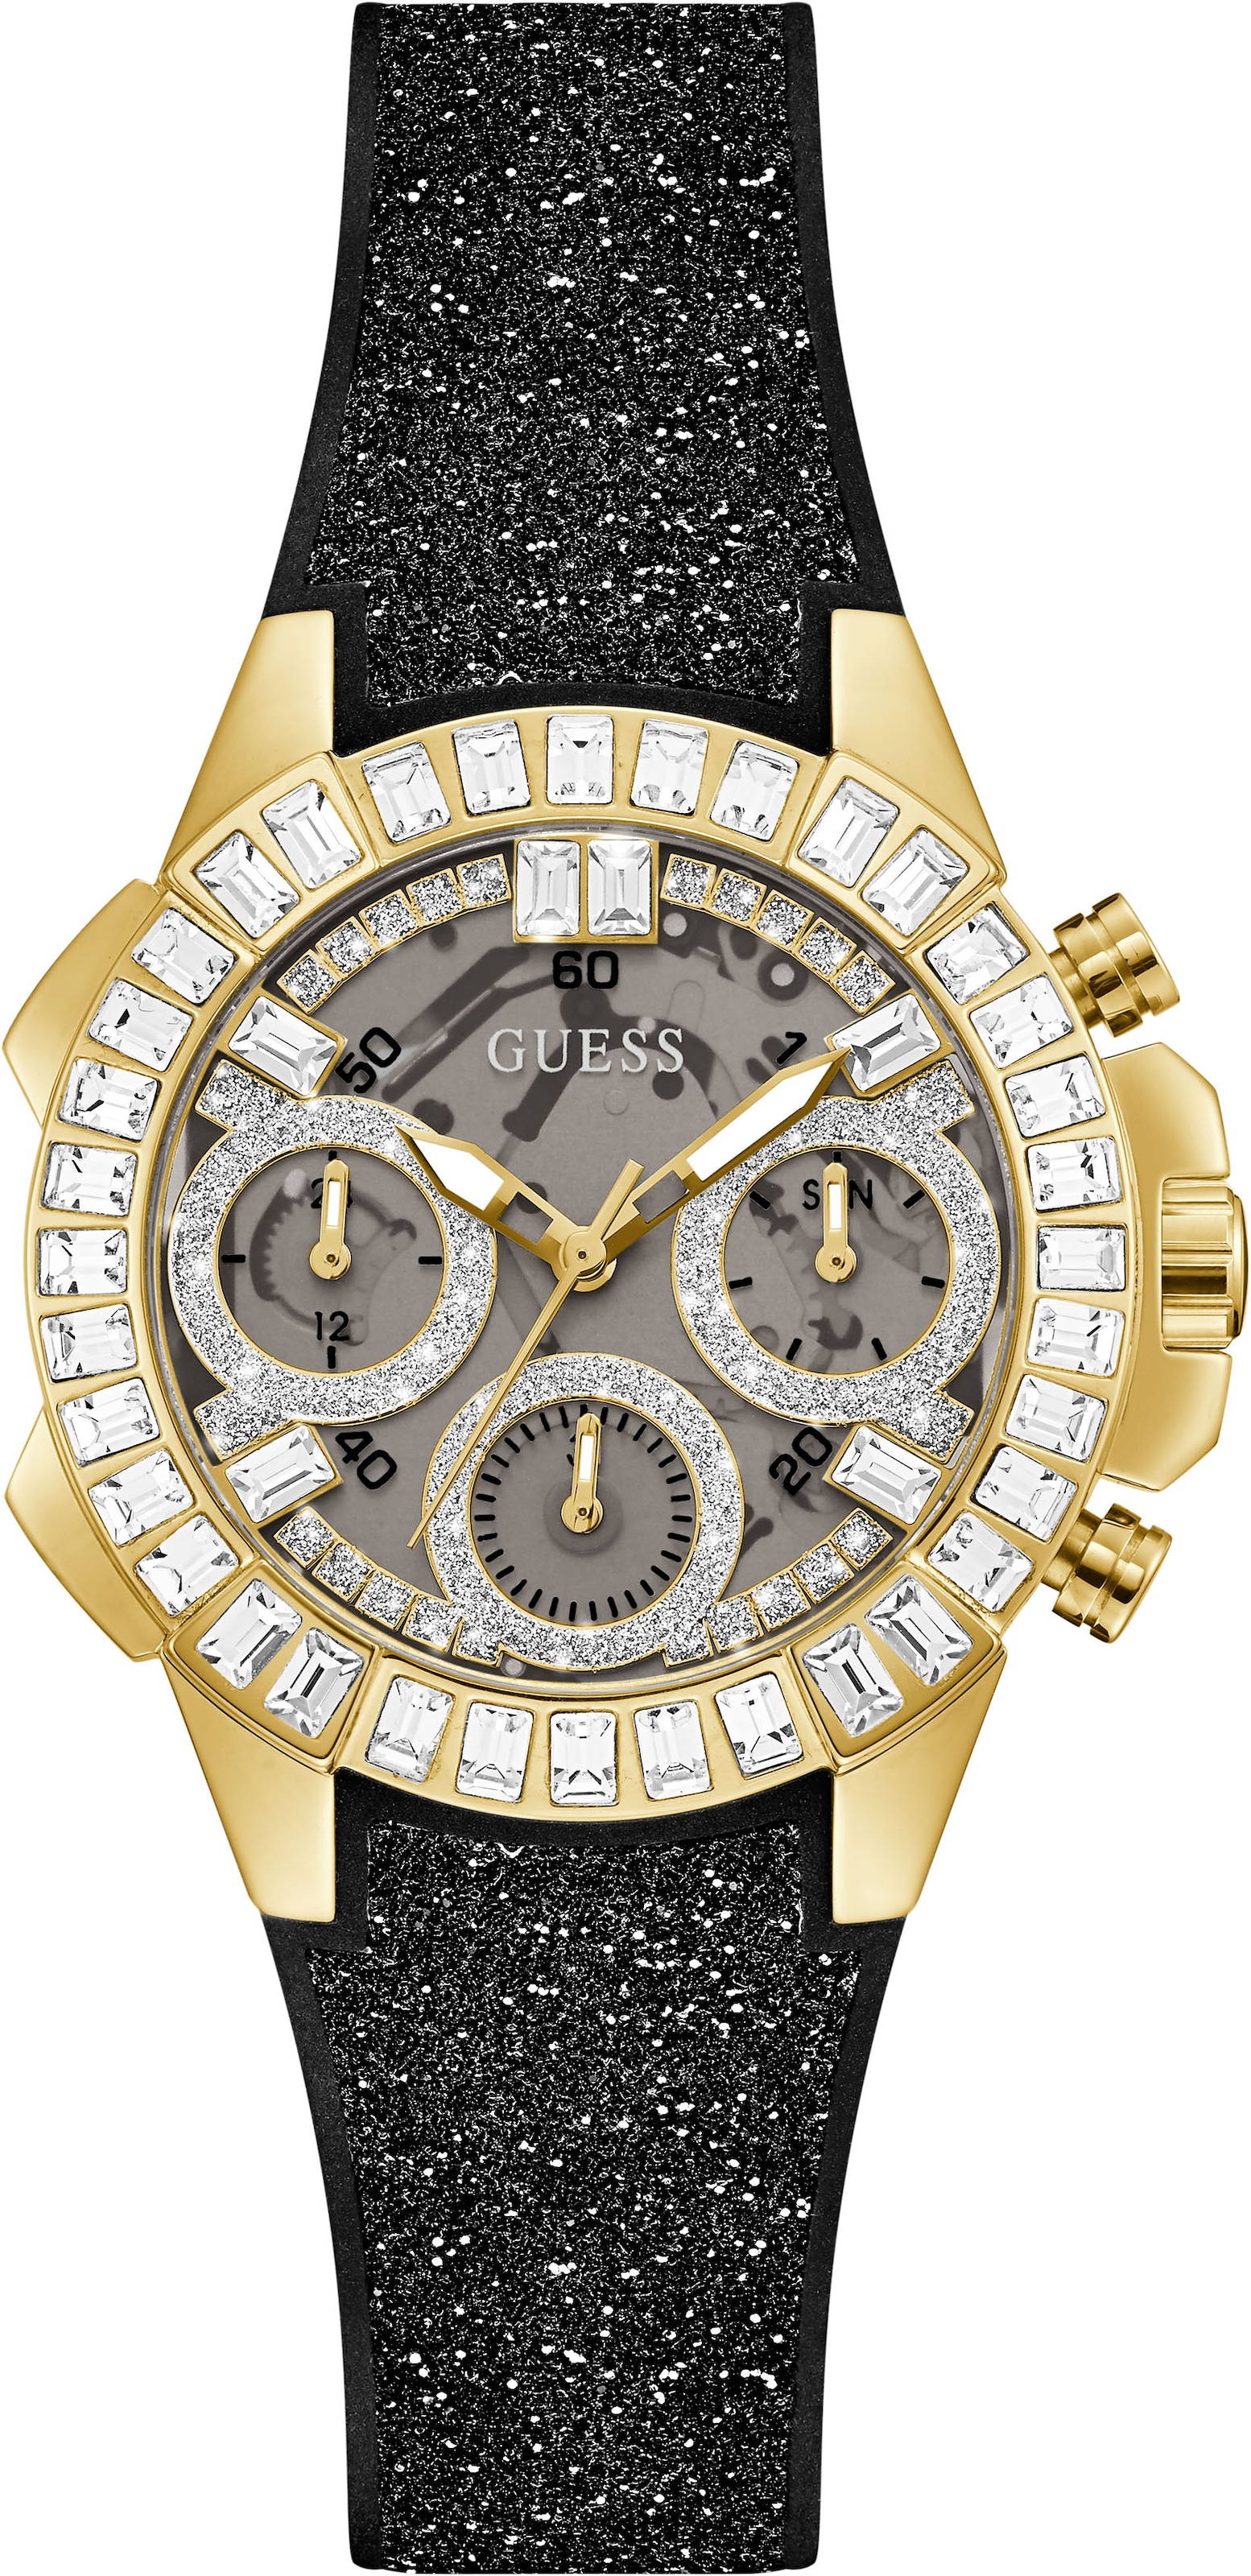 Guess Multifunktionsuhr »GW0313L2,BOMBSHELL« kaufen bei OTTO